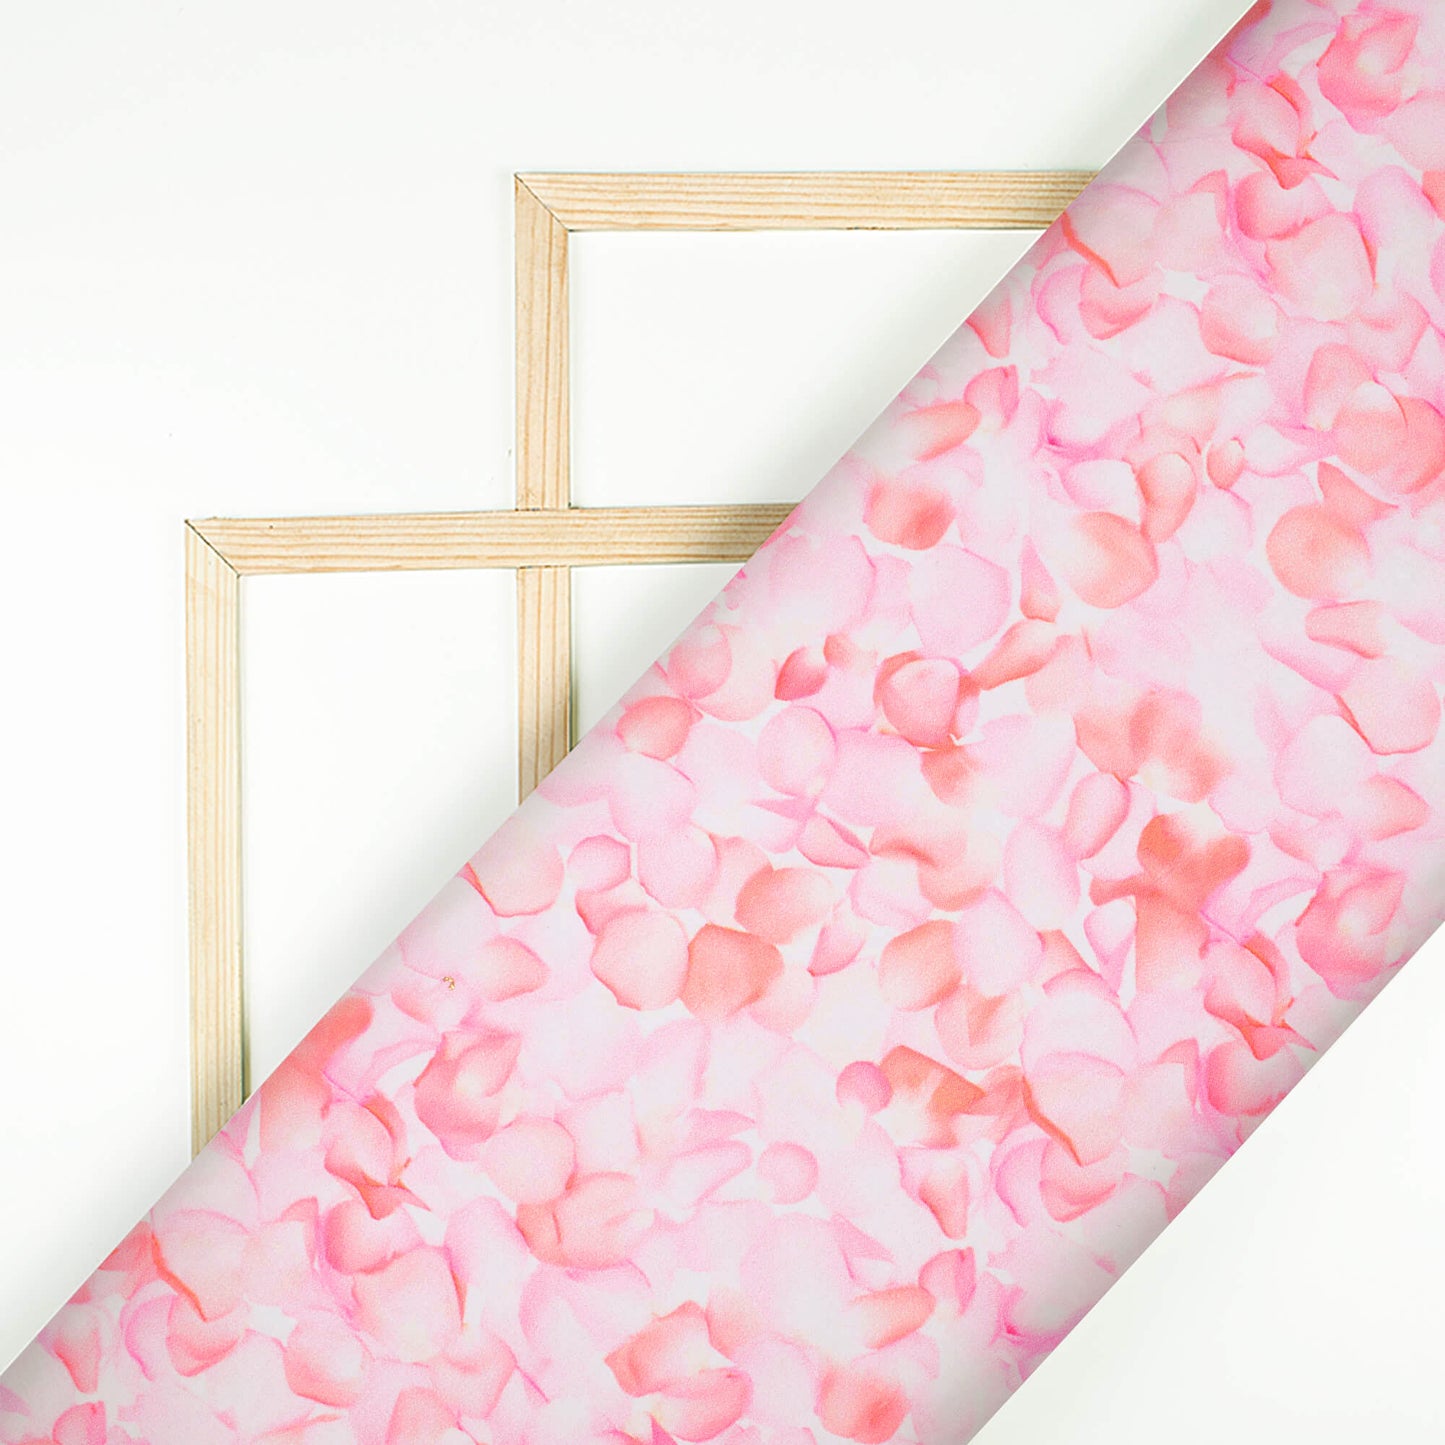 Taffy Pink And White Floral Pattern Digital Print Ultra Premium Butter Crepe Fabric